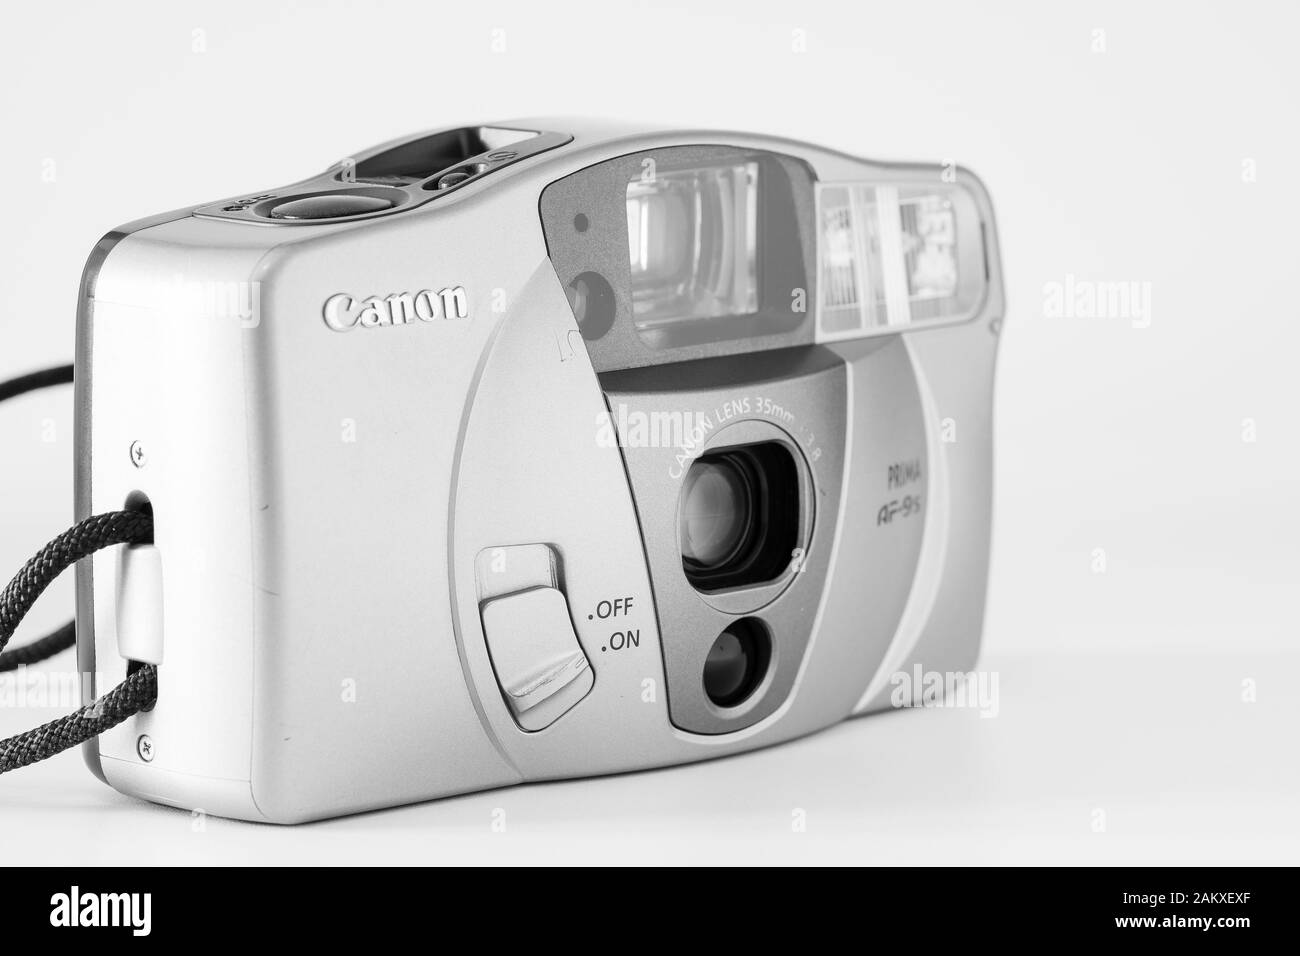 Angular view of a compact analog camera, 35mm system, Canon brand, 'Af9 Prima' model, monochrome image. Stock Photo